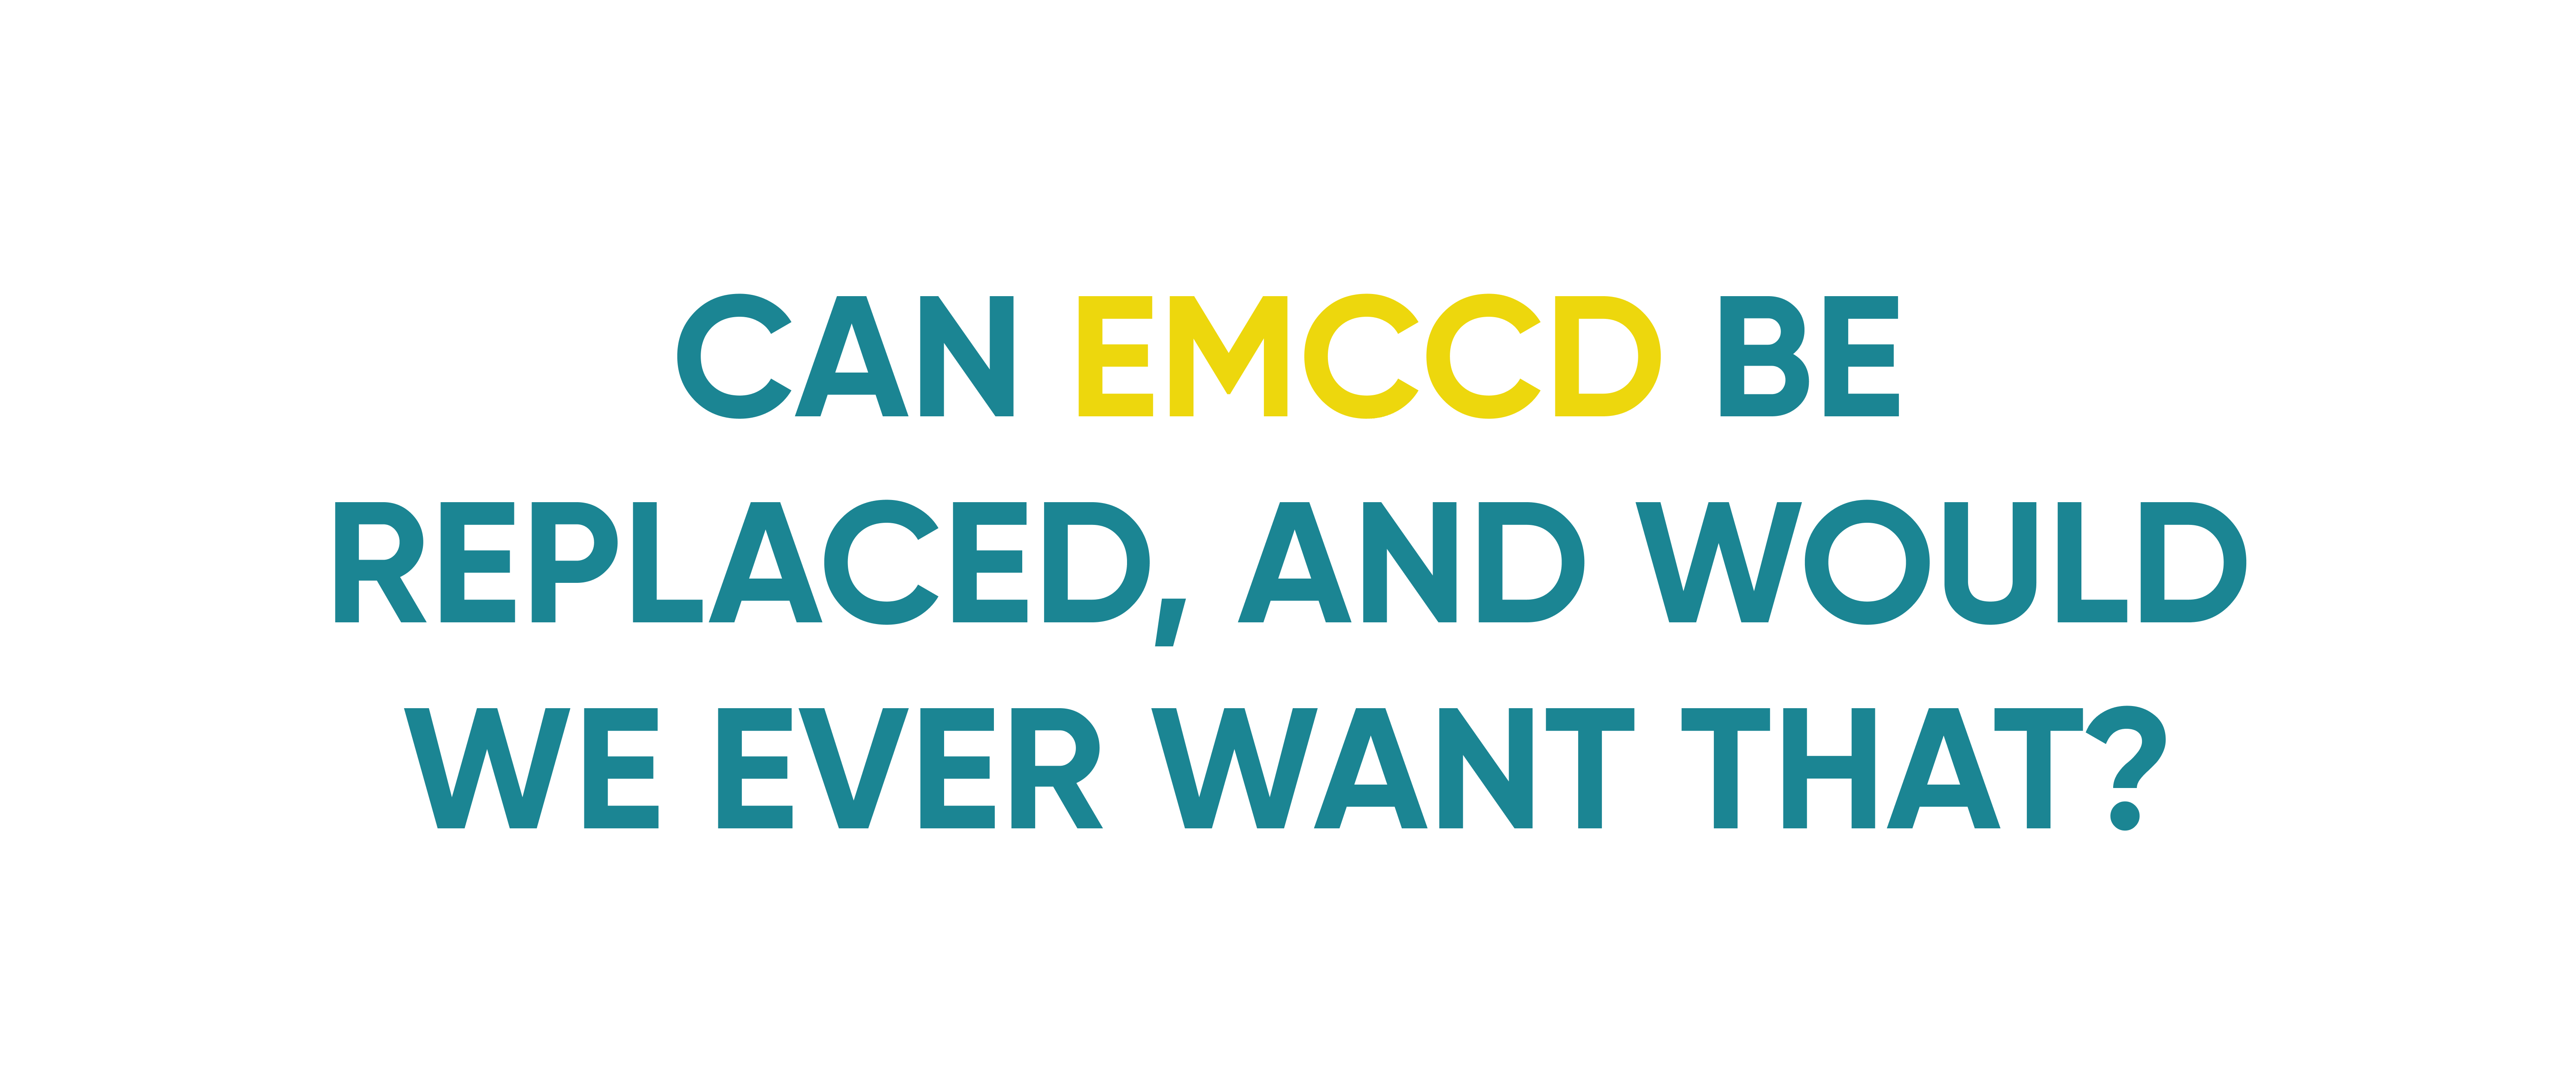 Can the EMCCD Be Replaced And Would We Ever Want That?